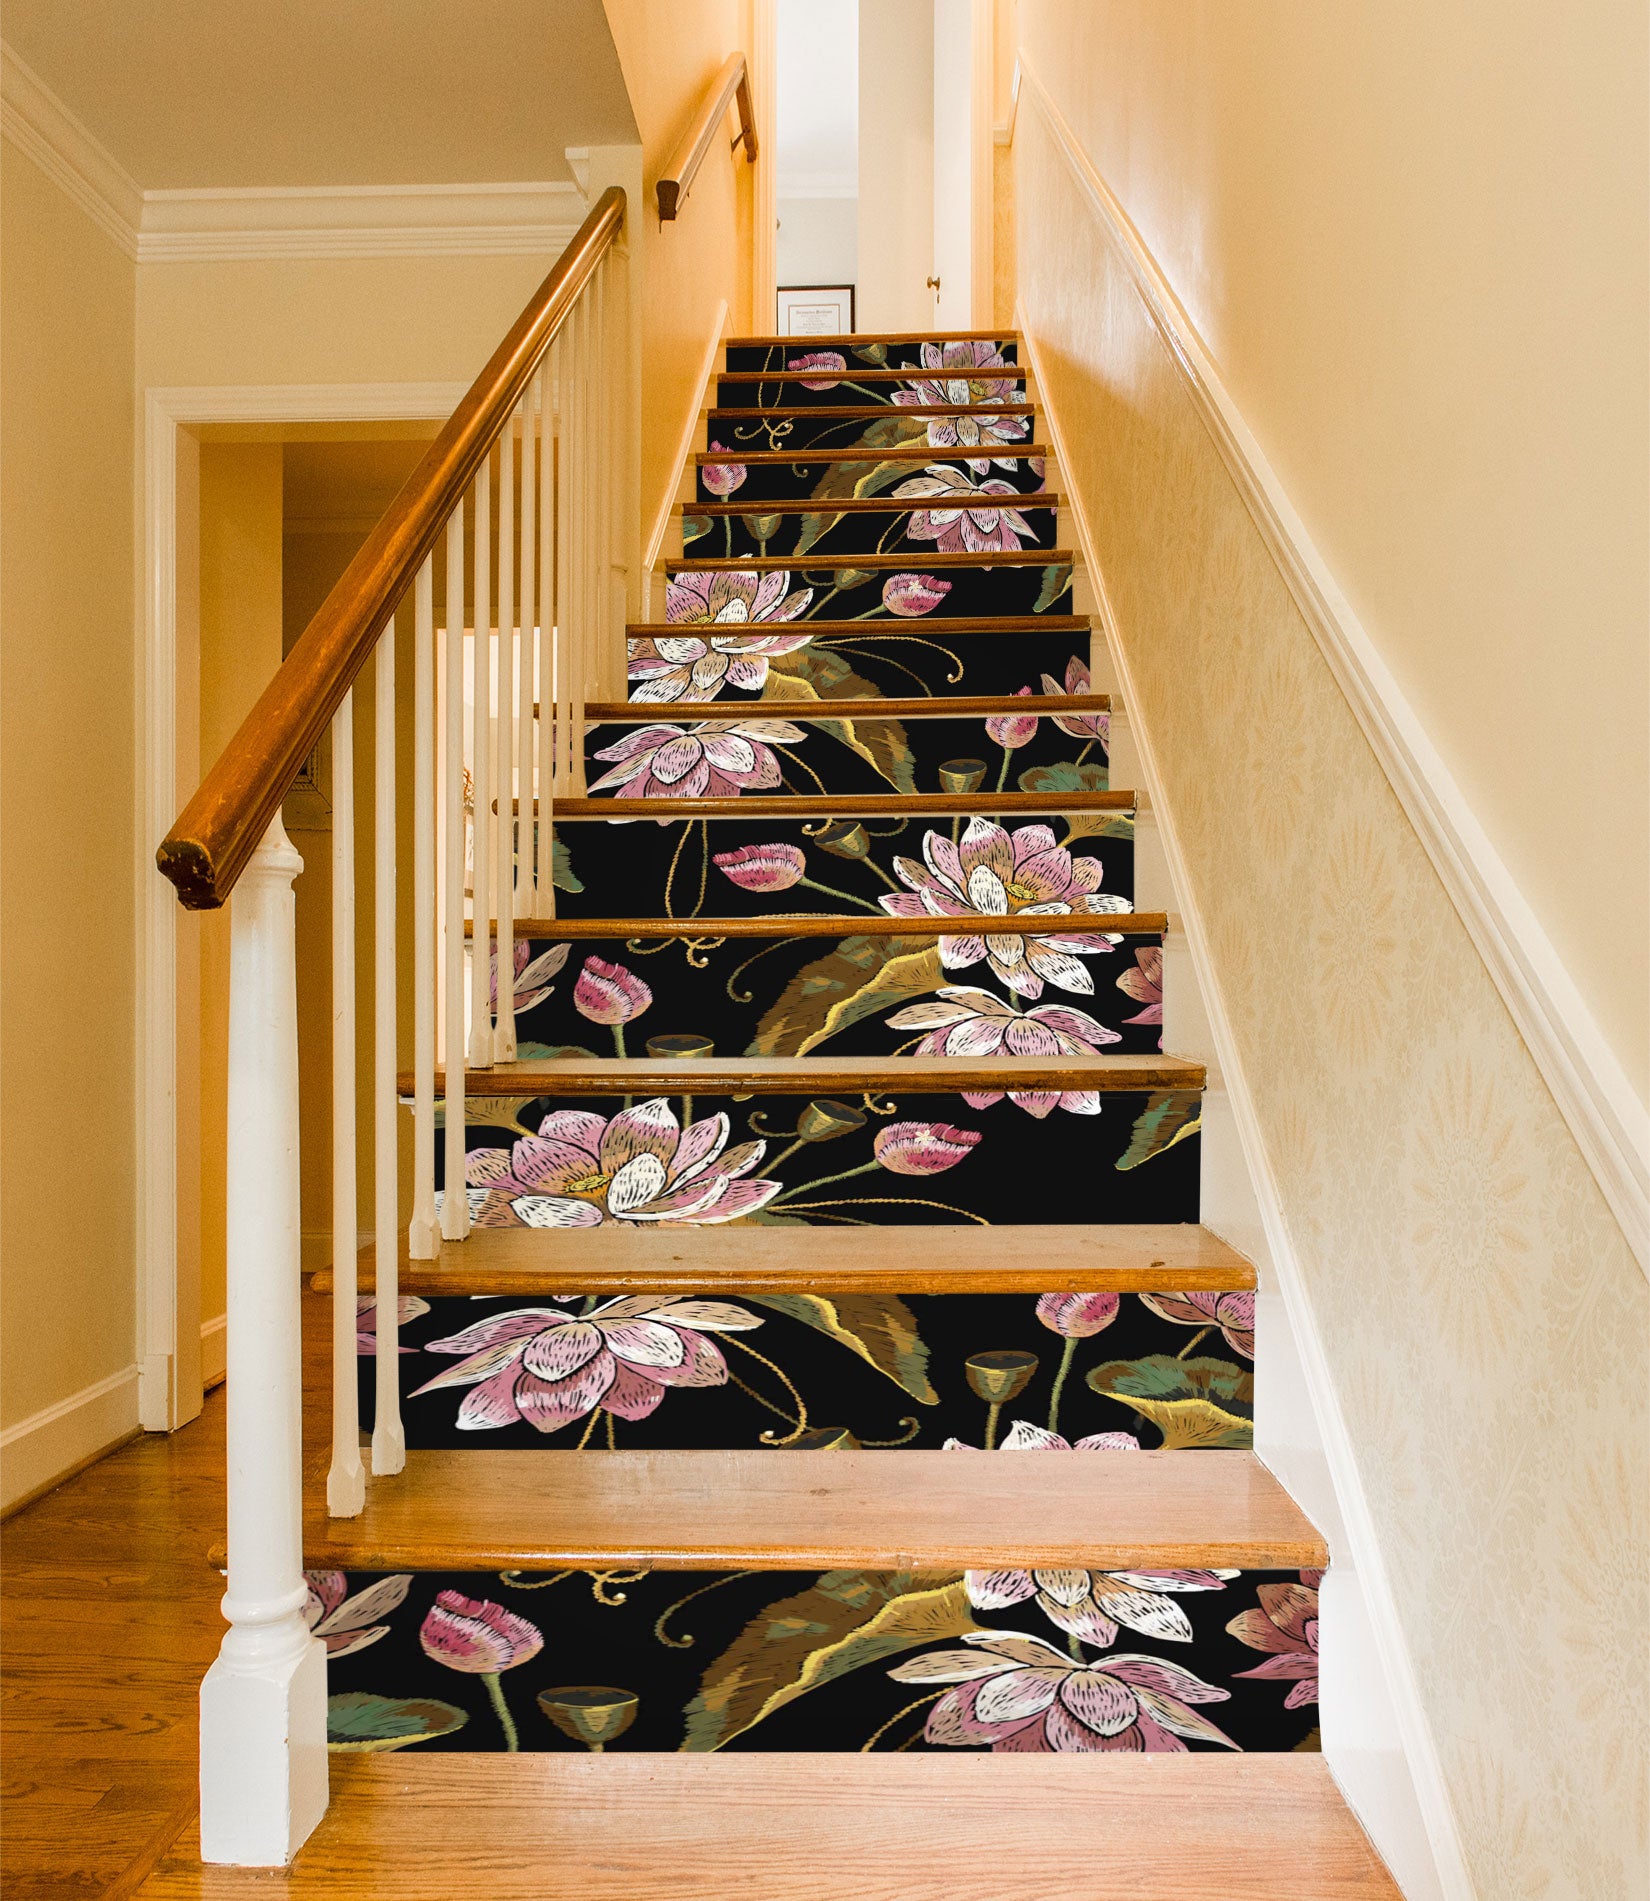 3D Colored Freeze-frame Flowers 478 Stair Risers